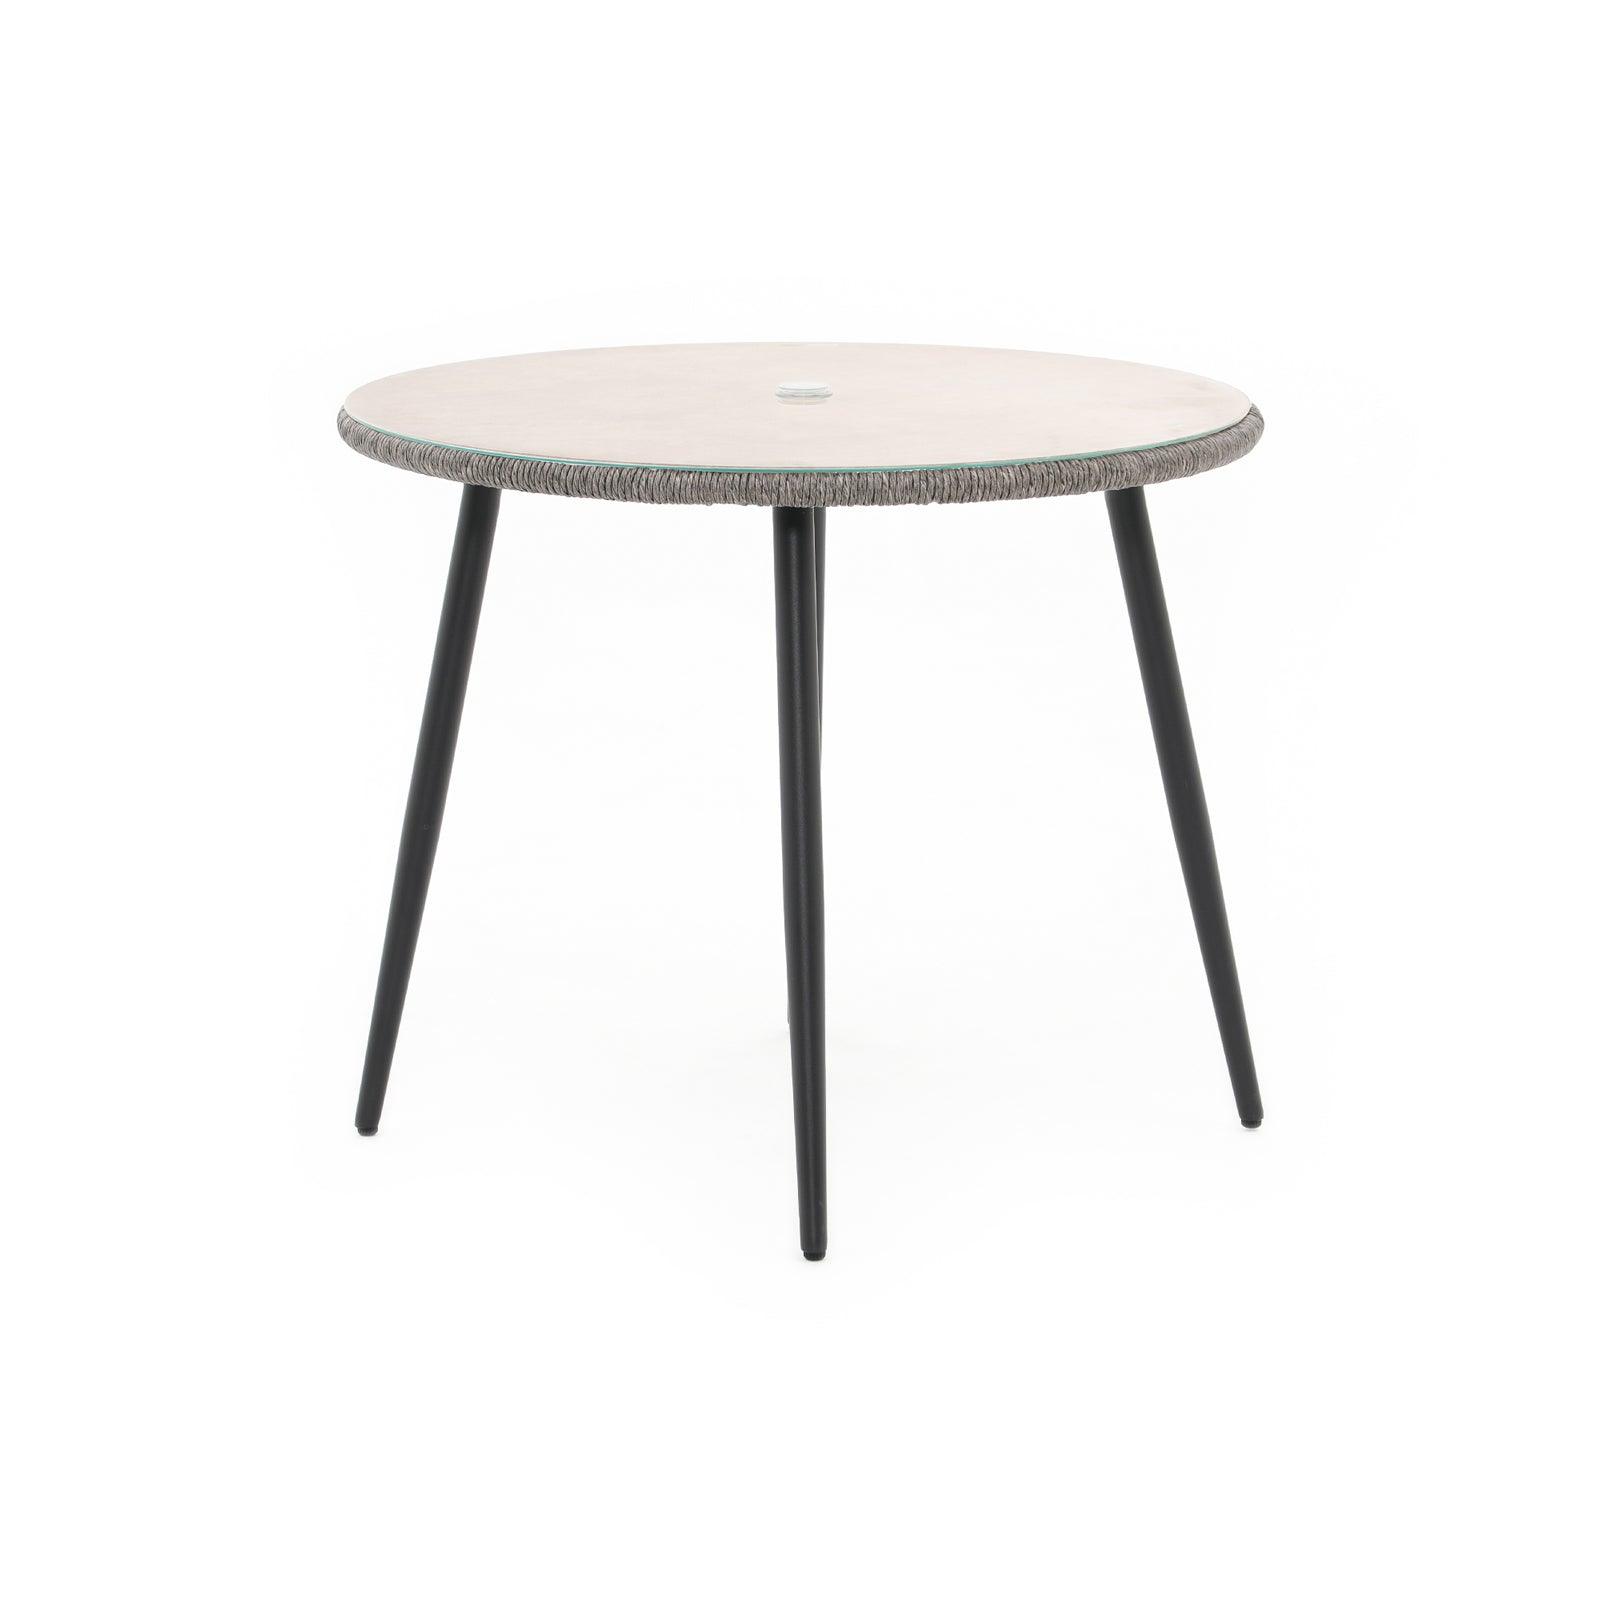 Hallerbos Outdoor Round Dining Table with umbrella hole and steel frame, grey rattan design, front - Jardina Furniture#Color_Grey